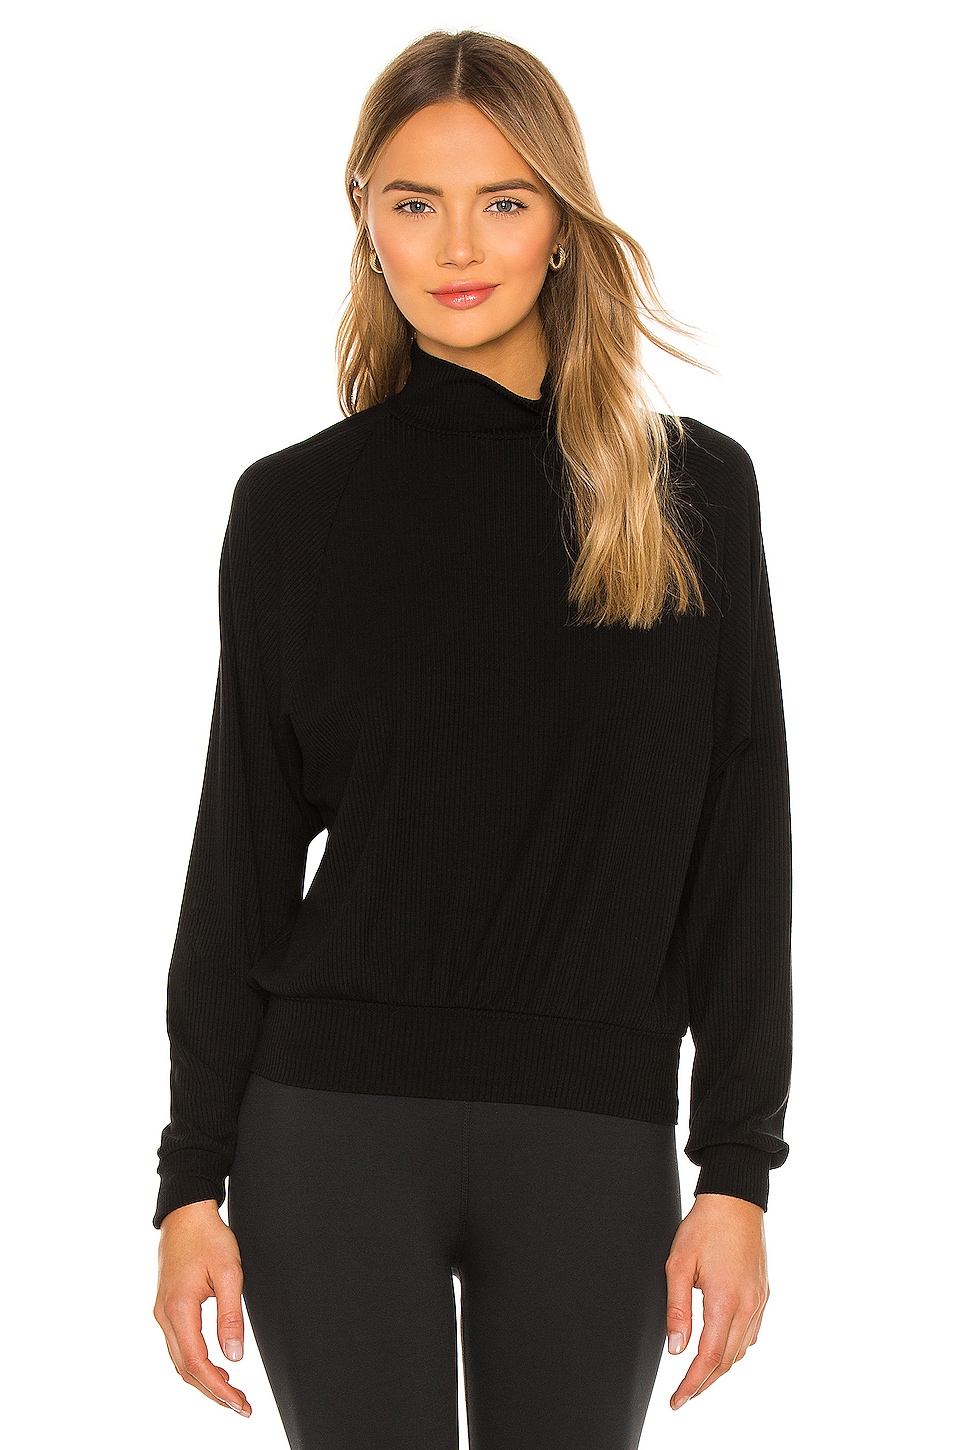 YEAR OF OURS Jane Mock Neck Top in Black | REVOLVE